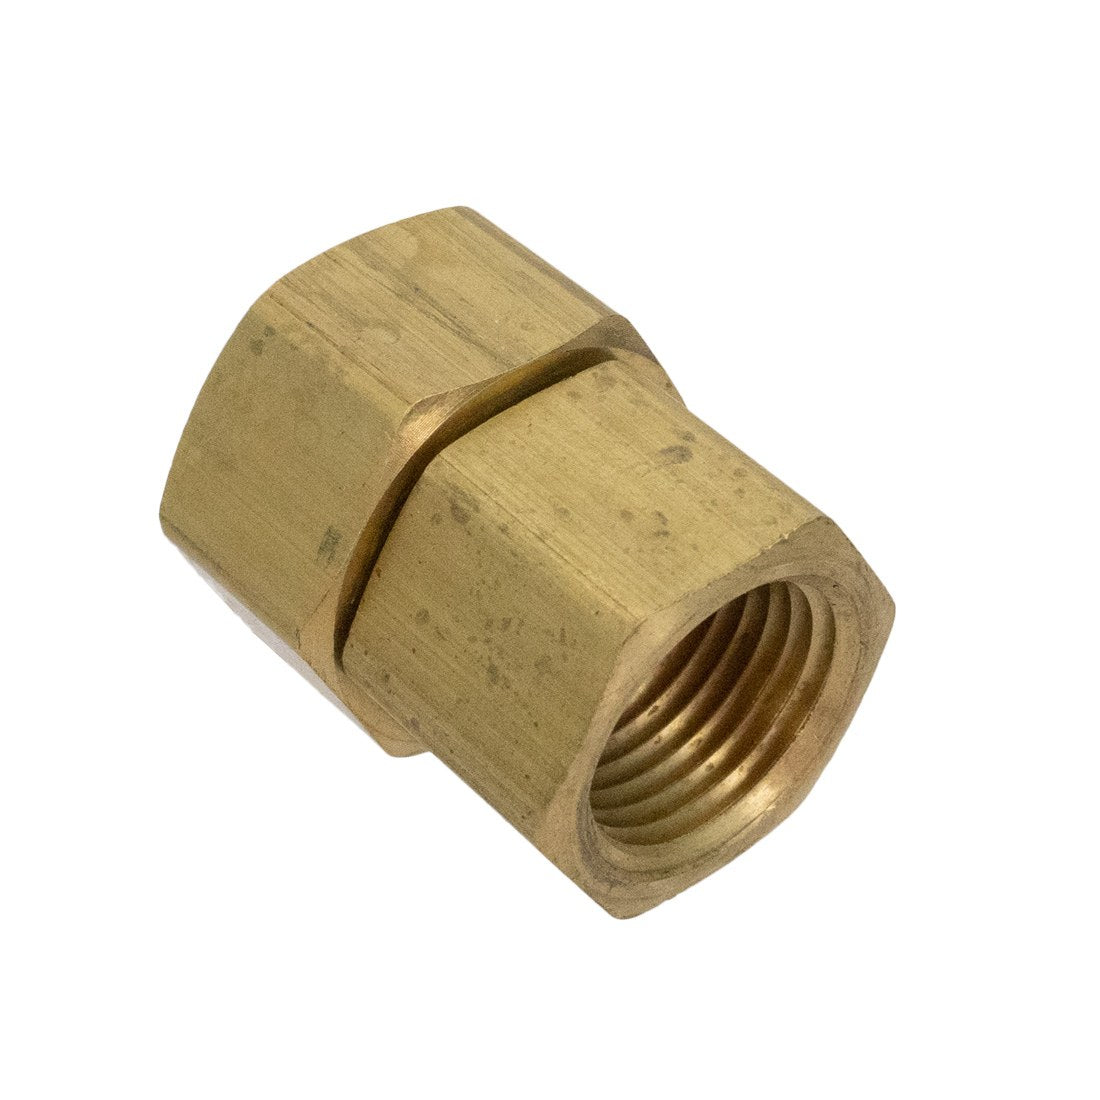 IPC Eagle Water Meter Adapter Fitting